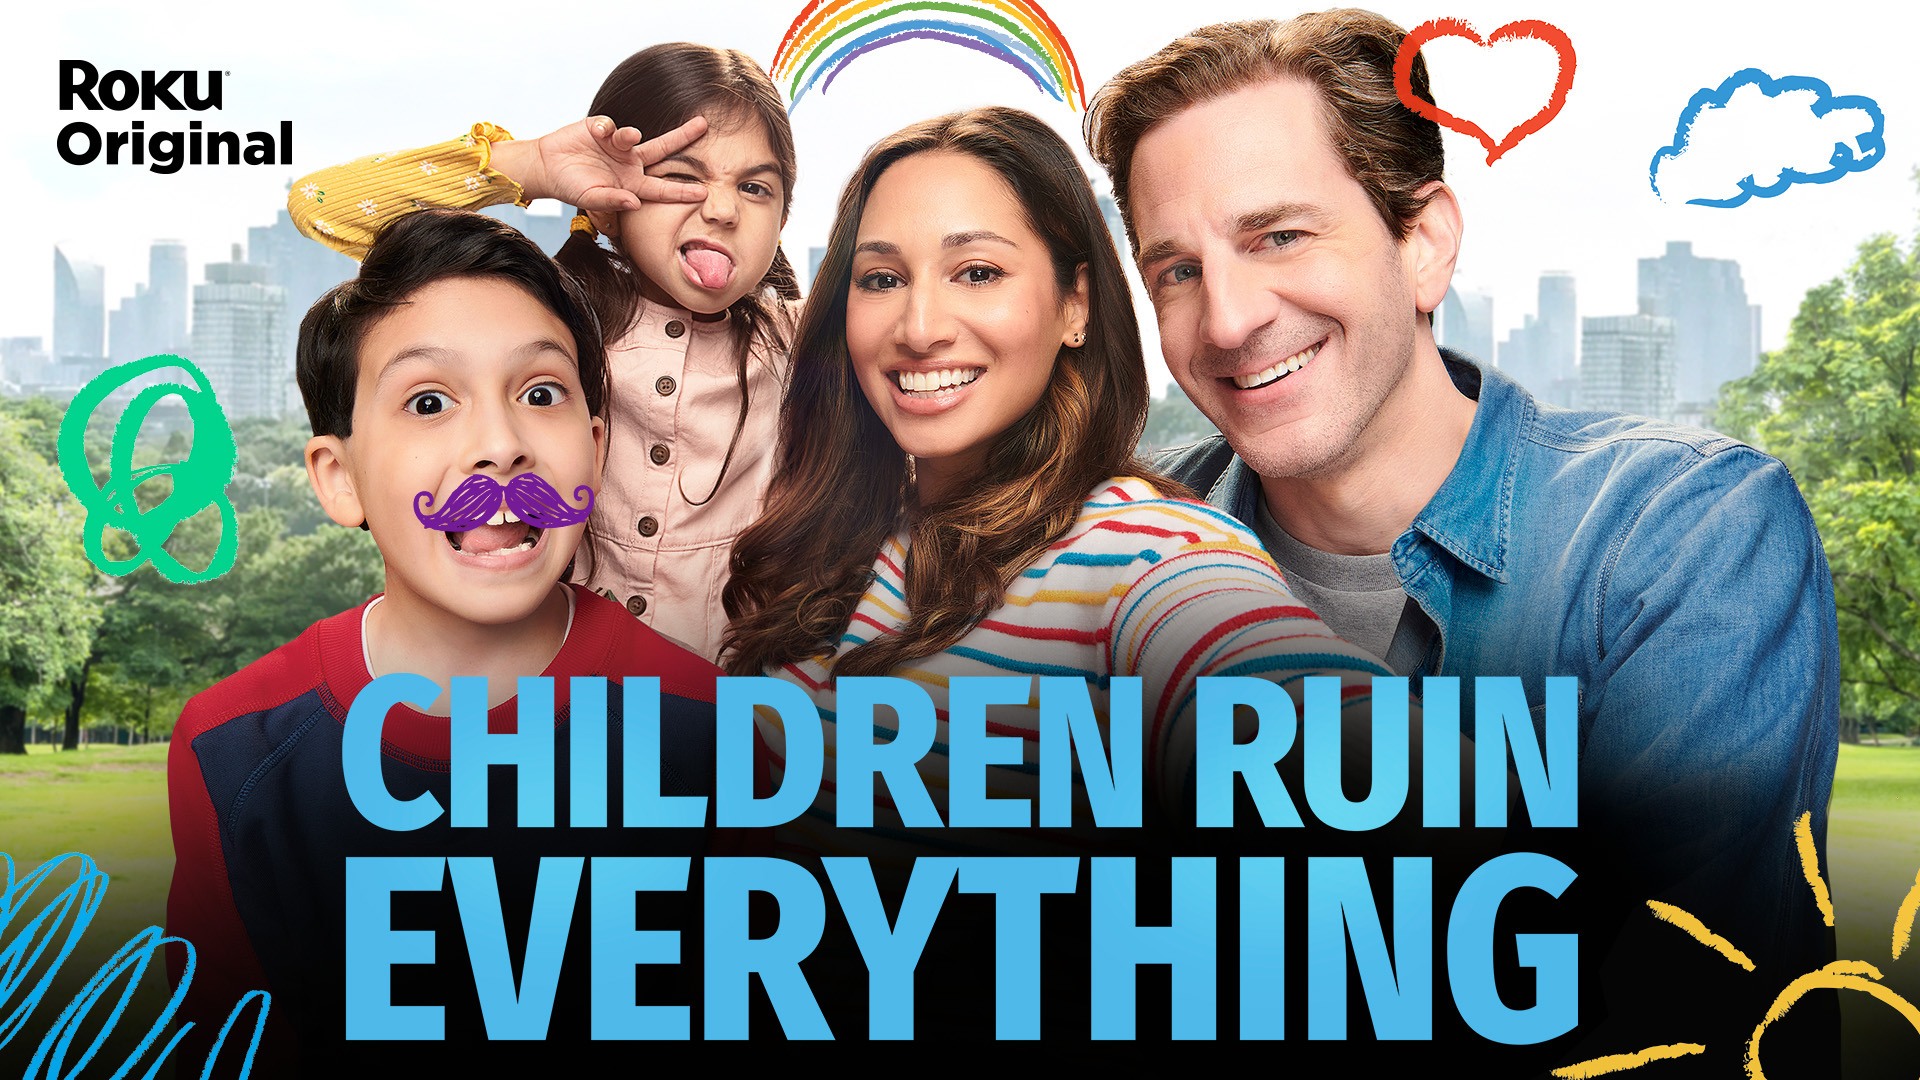 The Roku Channel Will Debut a New Original Series, ‘Children Ruin Everything,’ Next Month